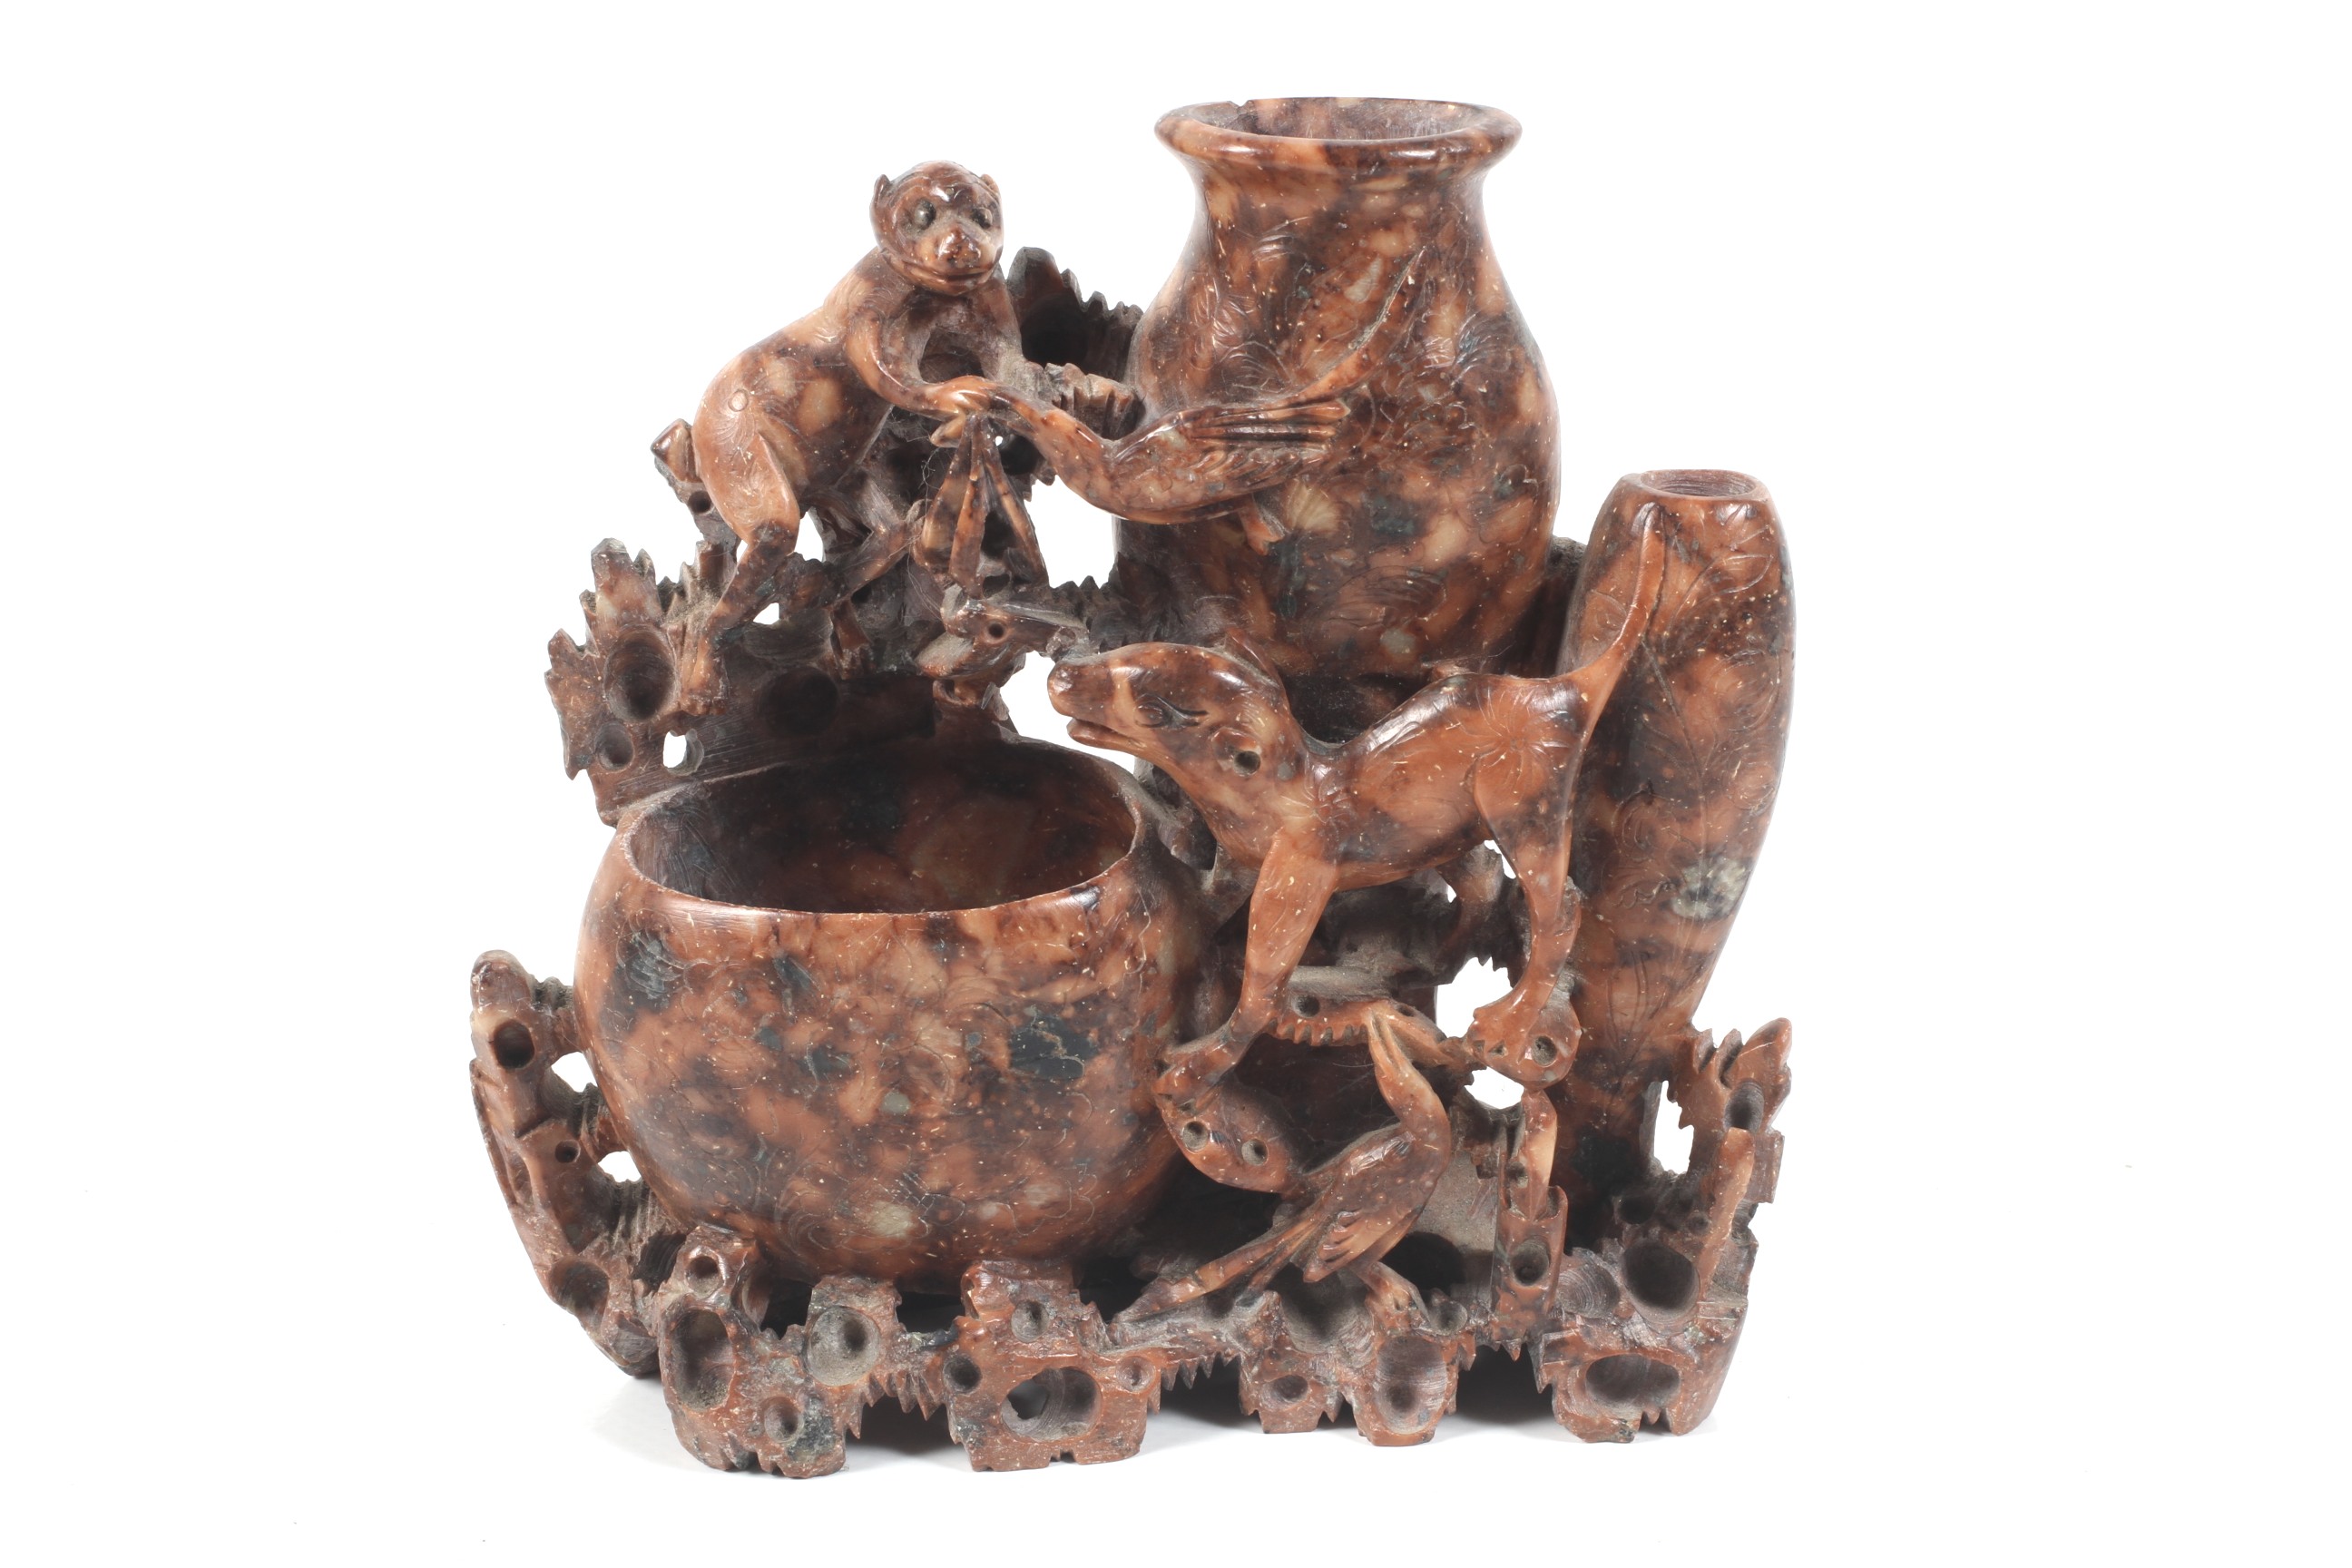 A Chinese carved soapstone carving. Depicting a monkey, dog and a bird standing by three open vases.